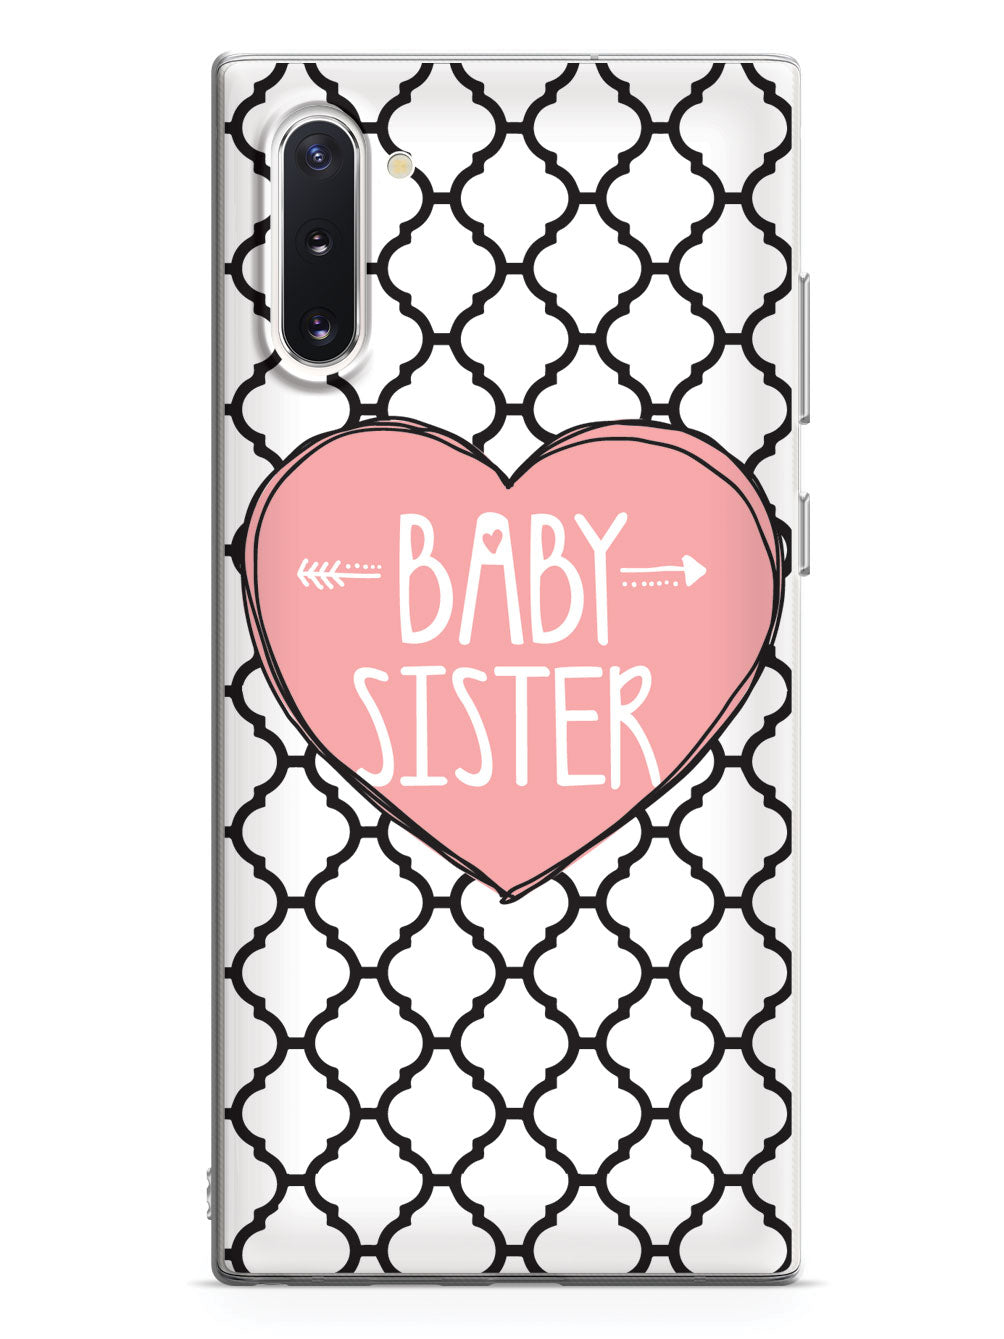 Sisterly Love - Baby Sister - Moroccan Pattern Case